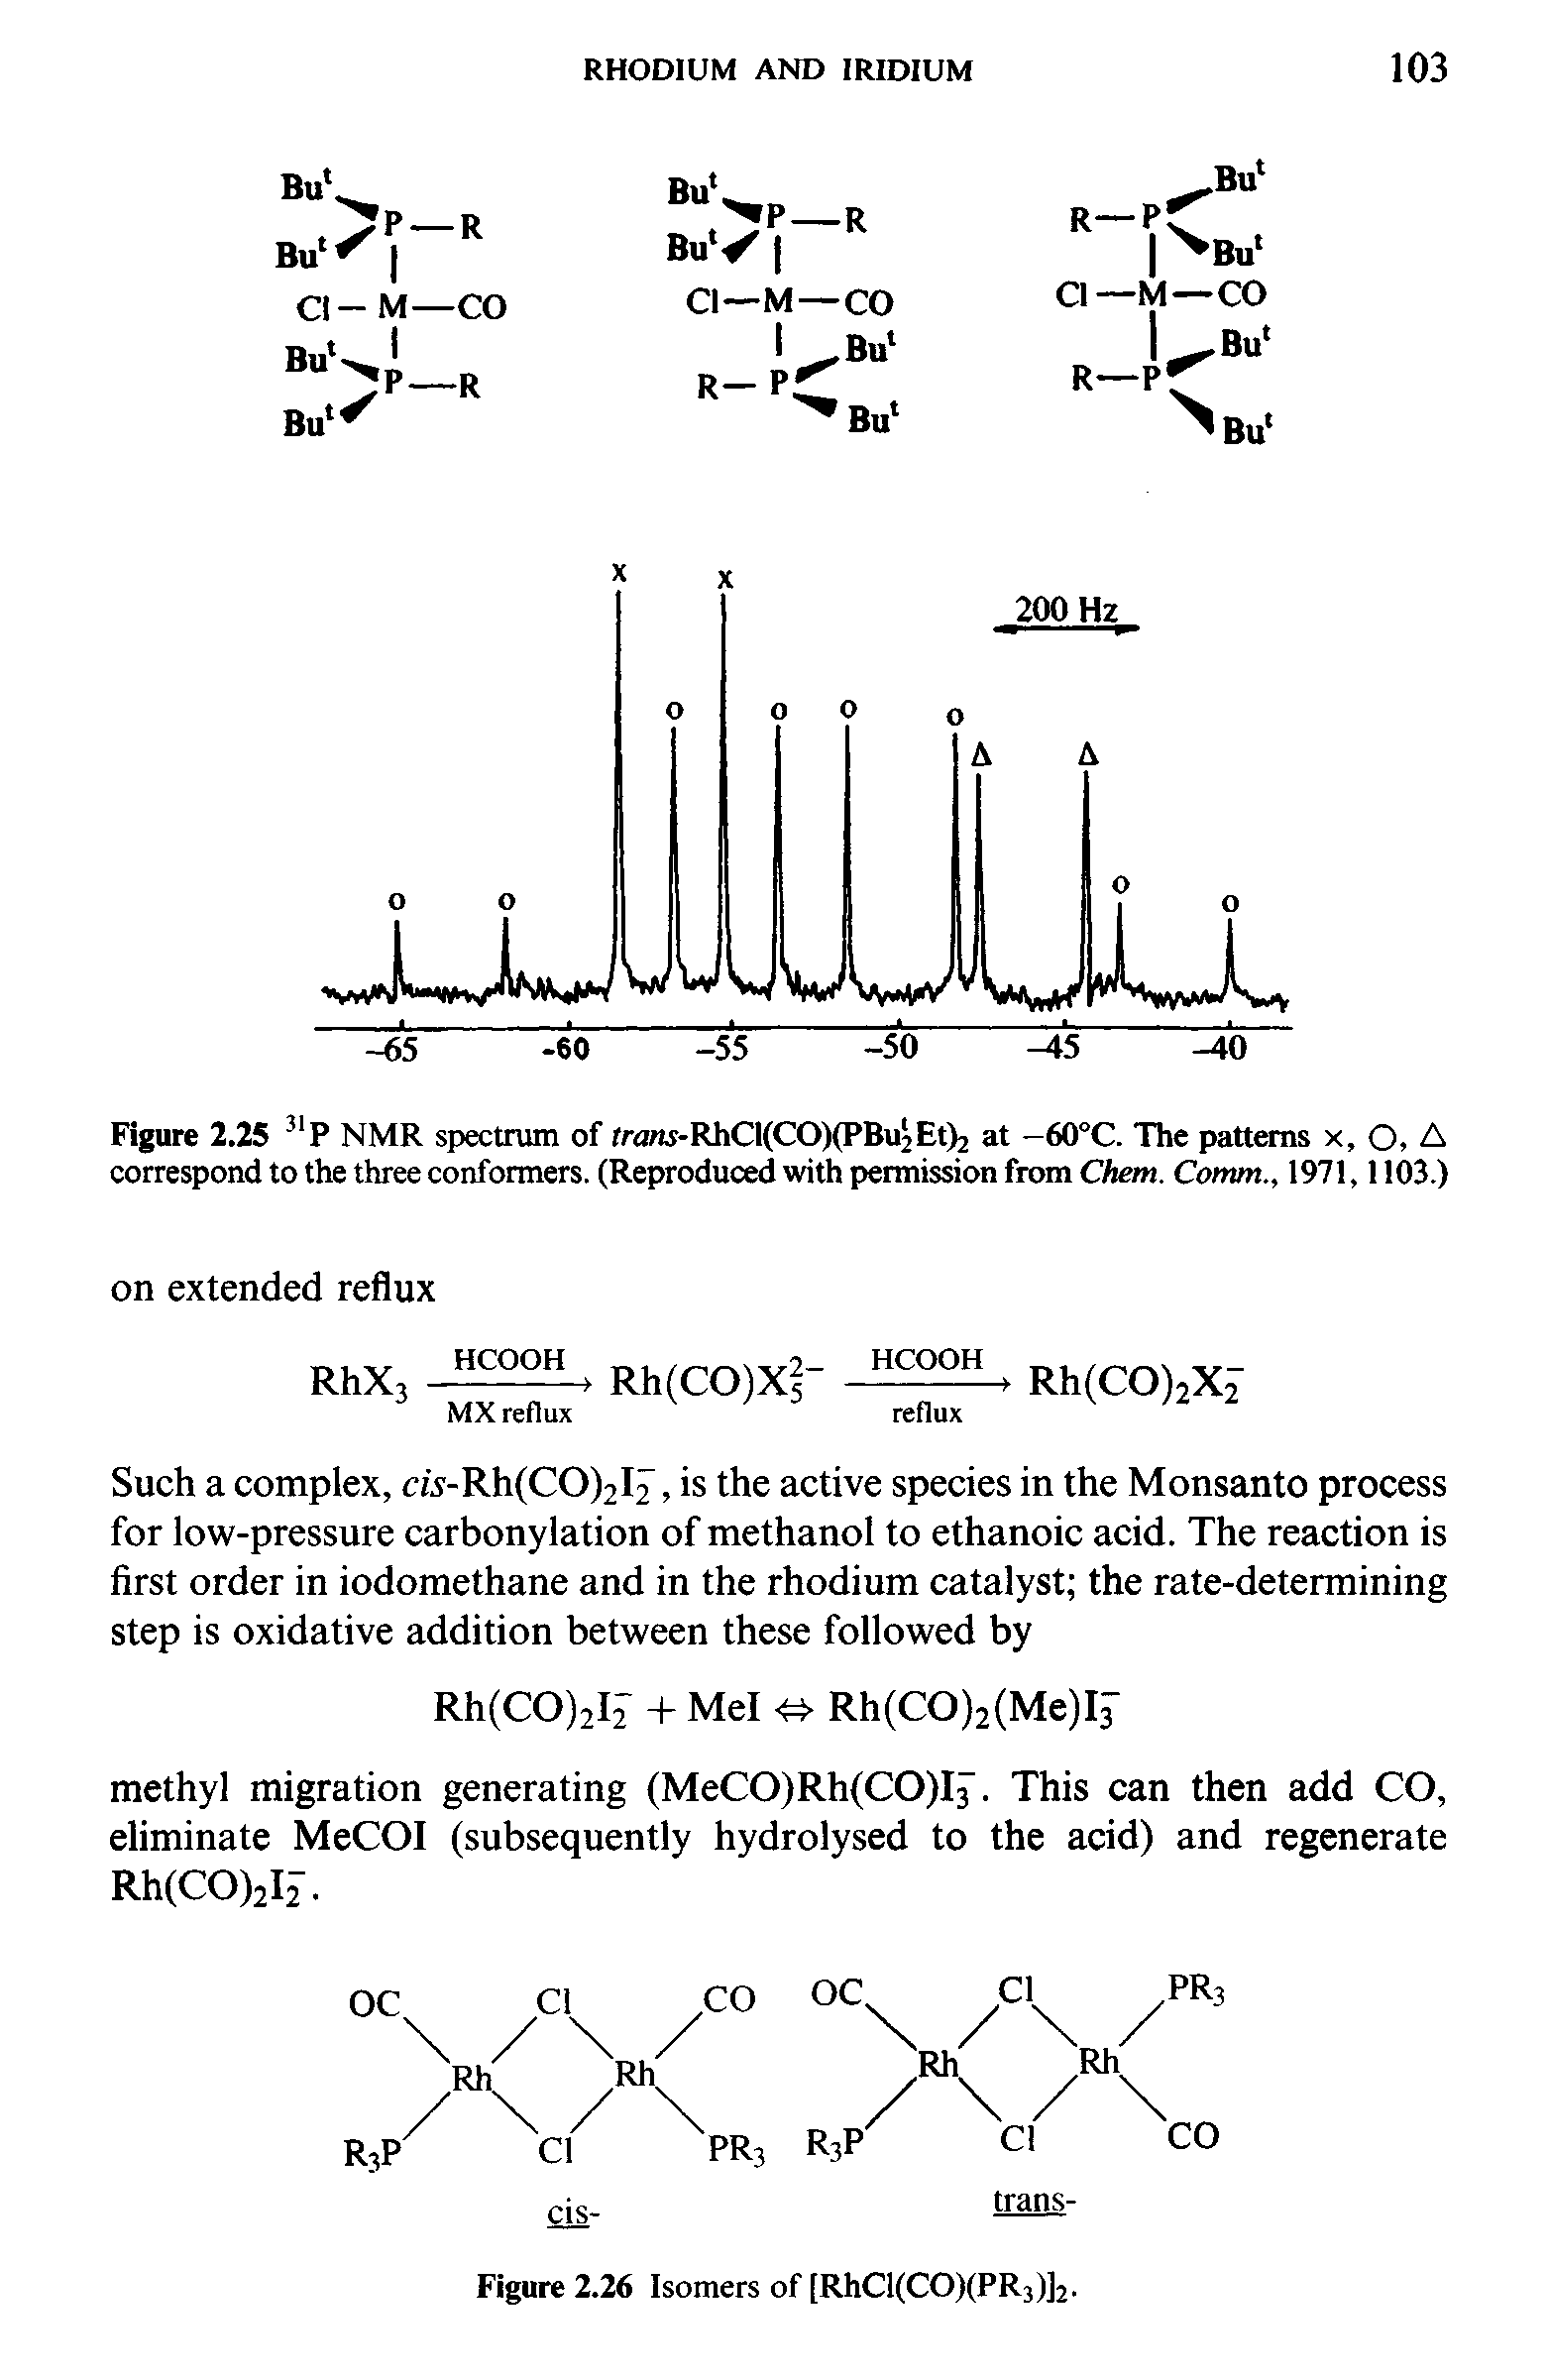 Figure 2.25 31P NMR spectrum of rranr-RhCI(CO)(PBu2Et)2 at -60°C. The patterns x, O, A correspond to the three conformers. (Reproduced with permission from Chem. Comm., 1971,1103.)...